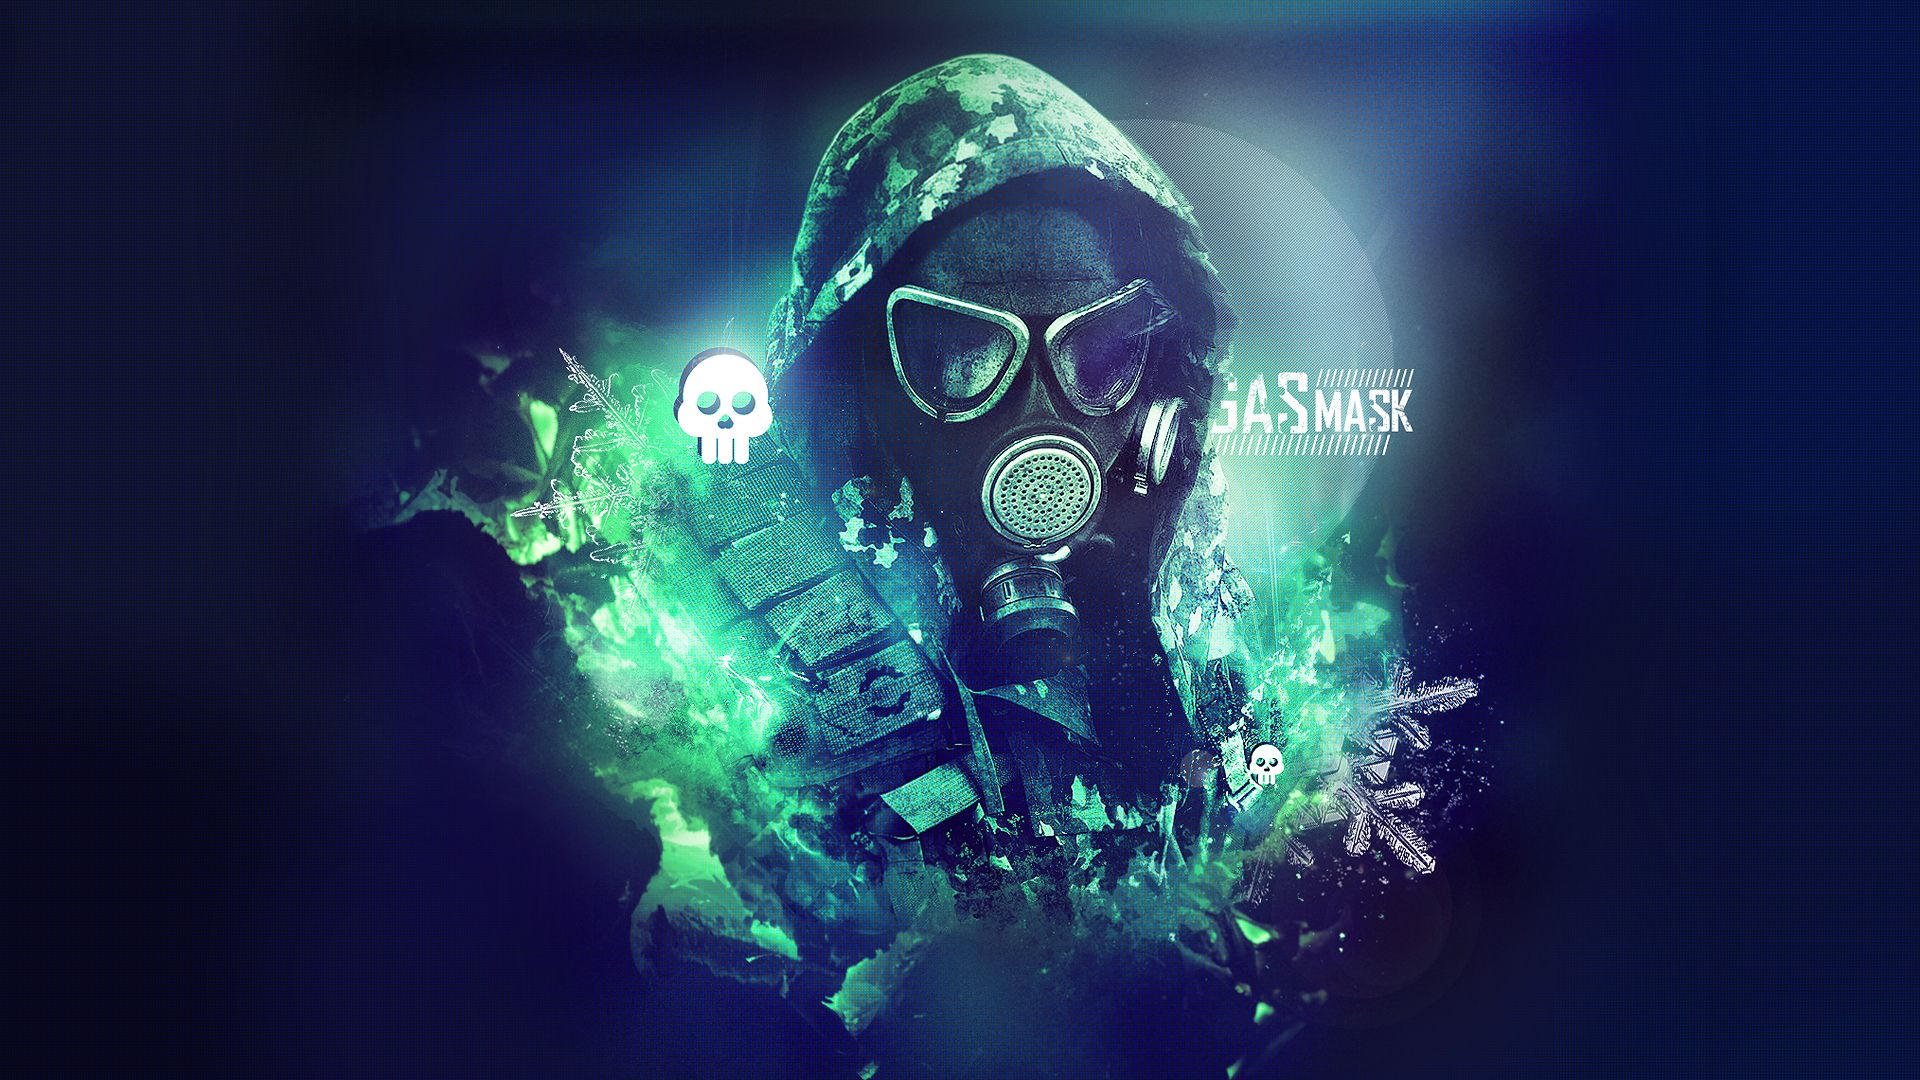 Free download Gas Mask by Seiikya [1920x1080] for your Desktop, Mobile & Tablet. Explore Epic Gas Mask Wallpaper. Mask Wallpaper, Cool Gas Mask Wallpaper, Dubstep Gas Mask Wallpaper